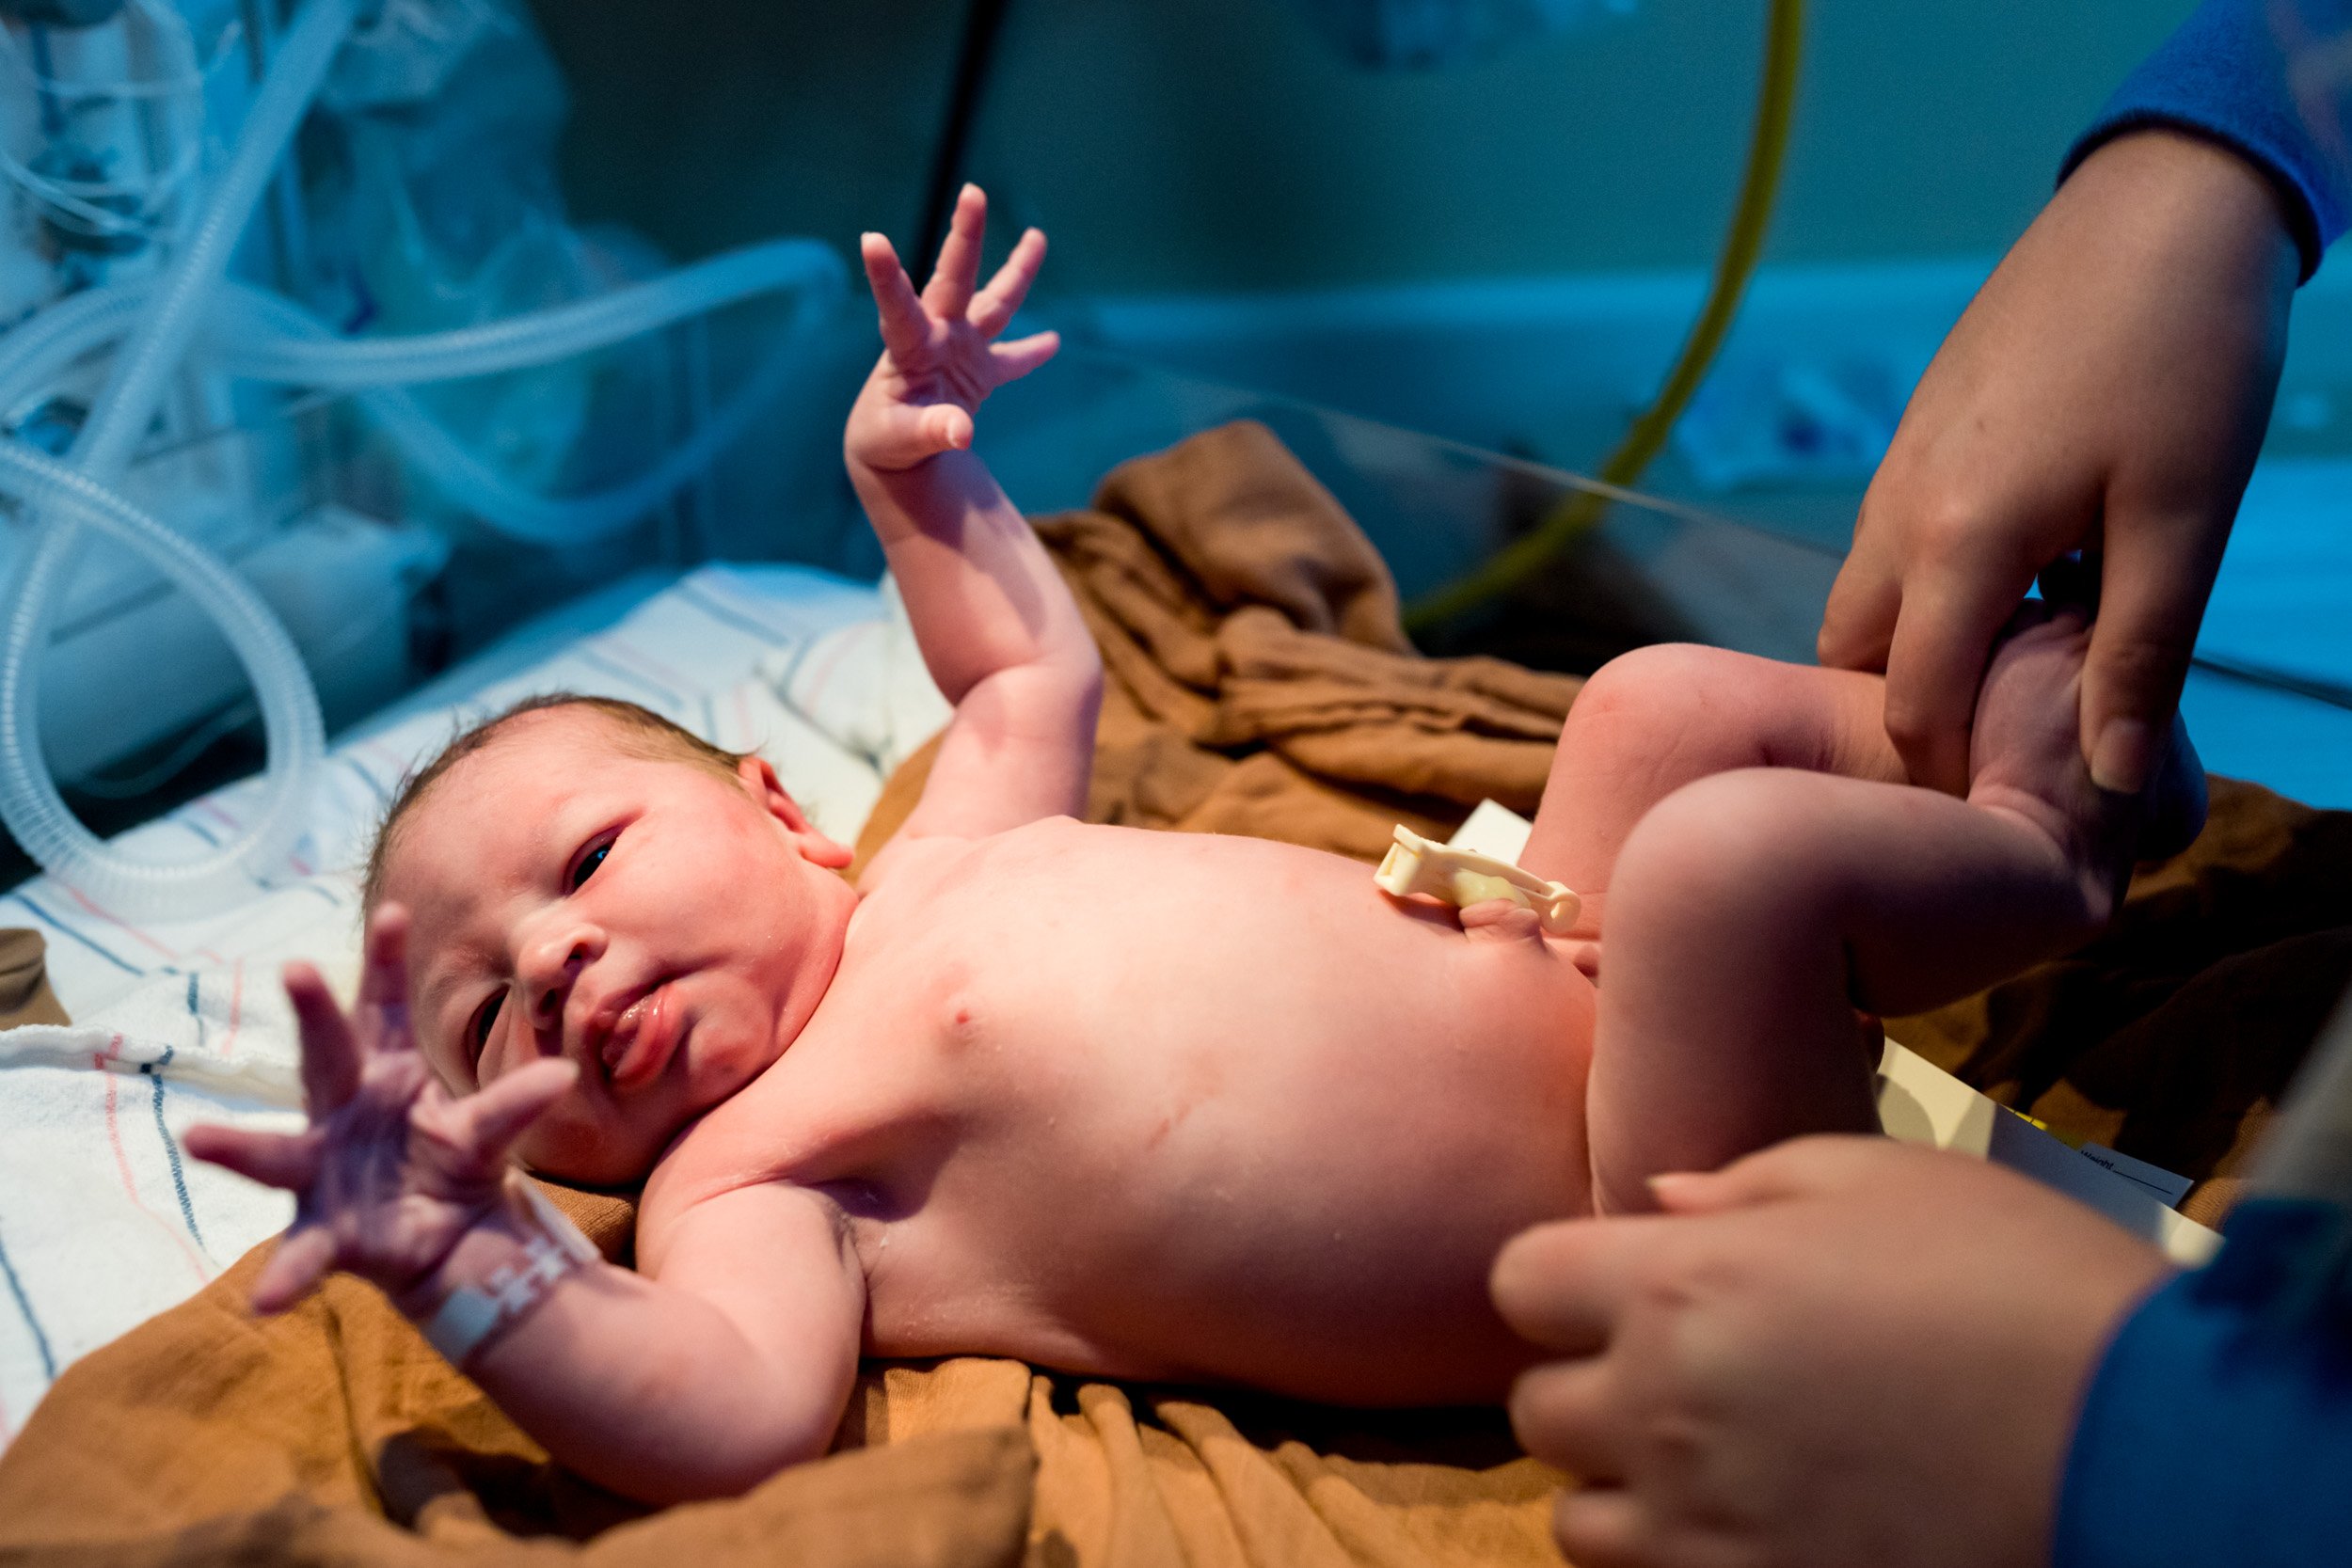 newborn baby with arms stretched out as they are doing the newborn exam